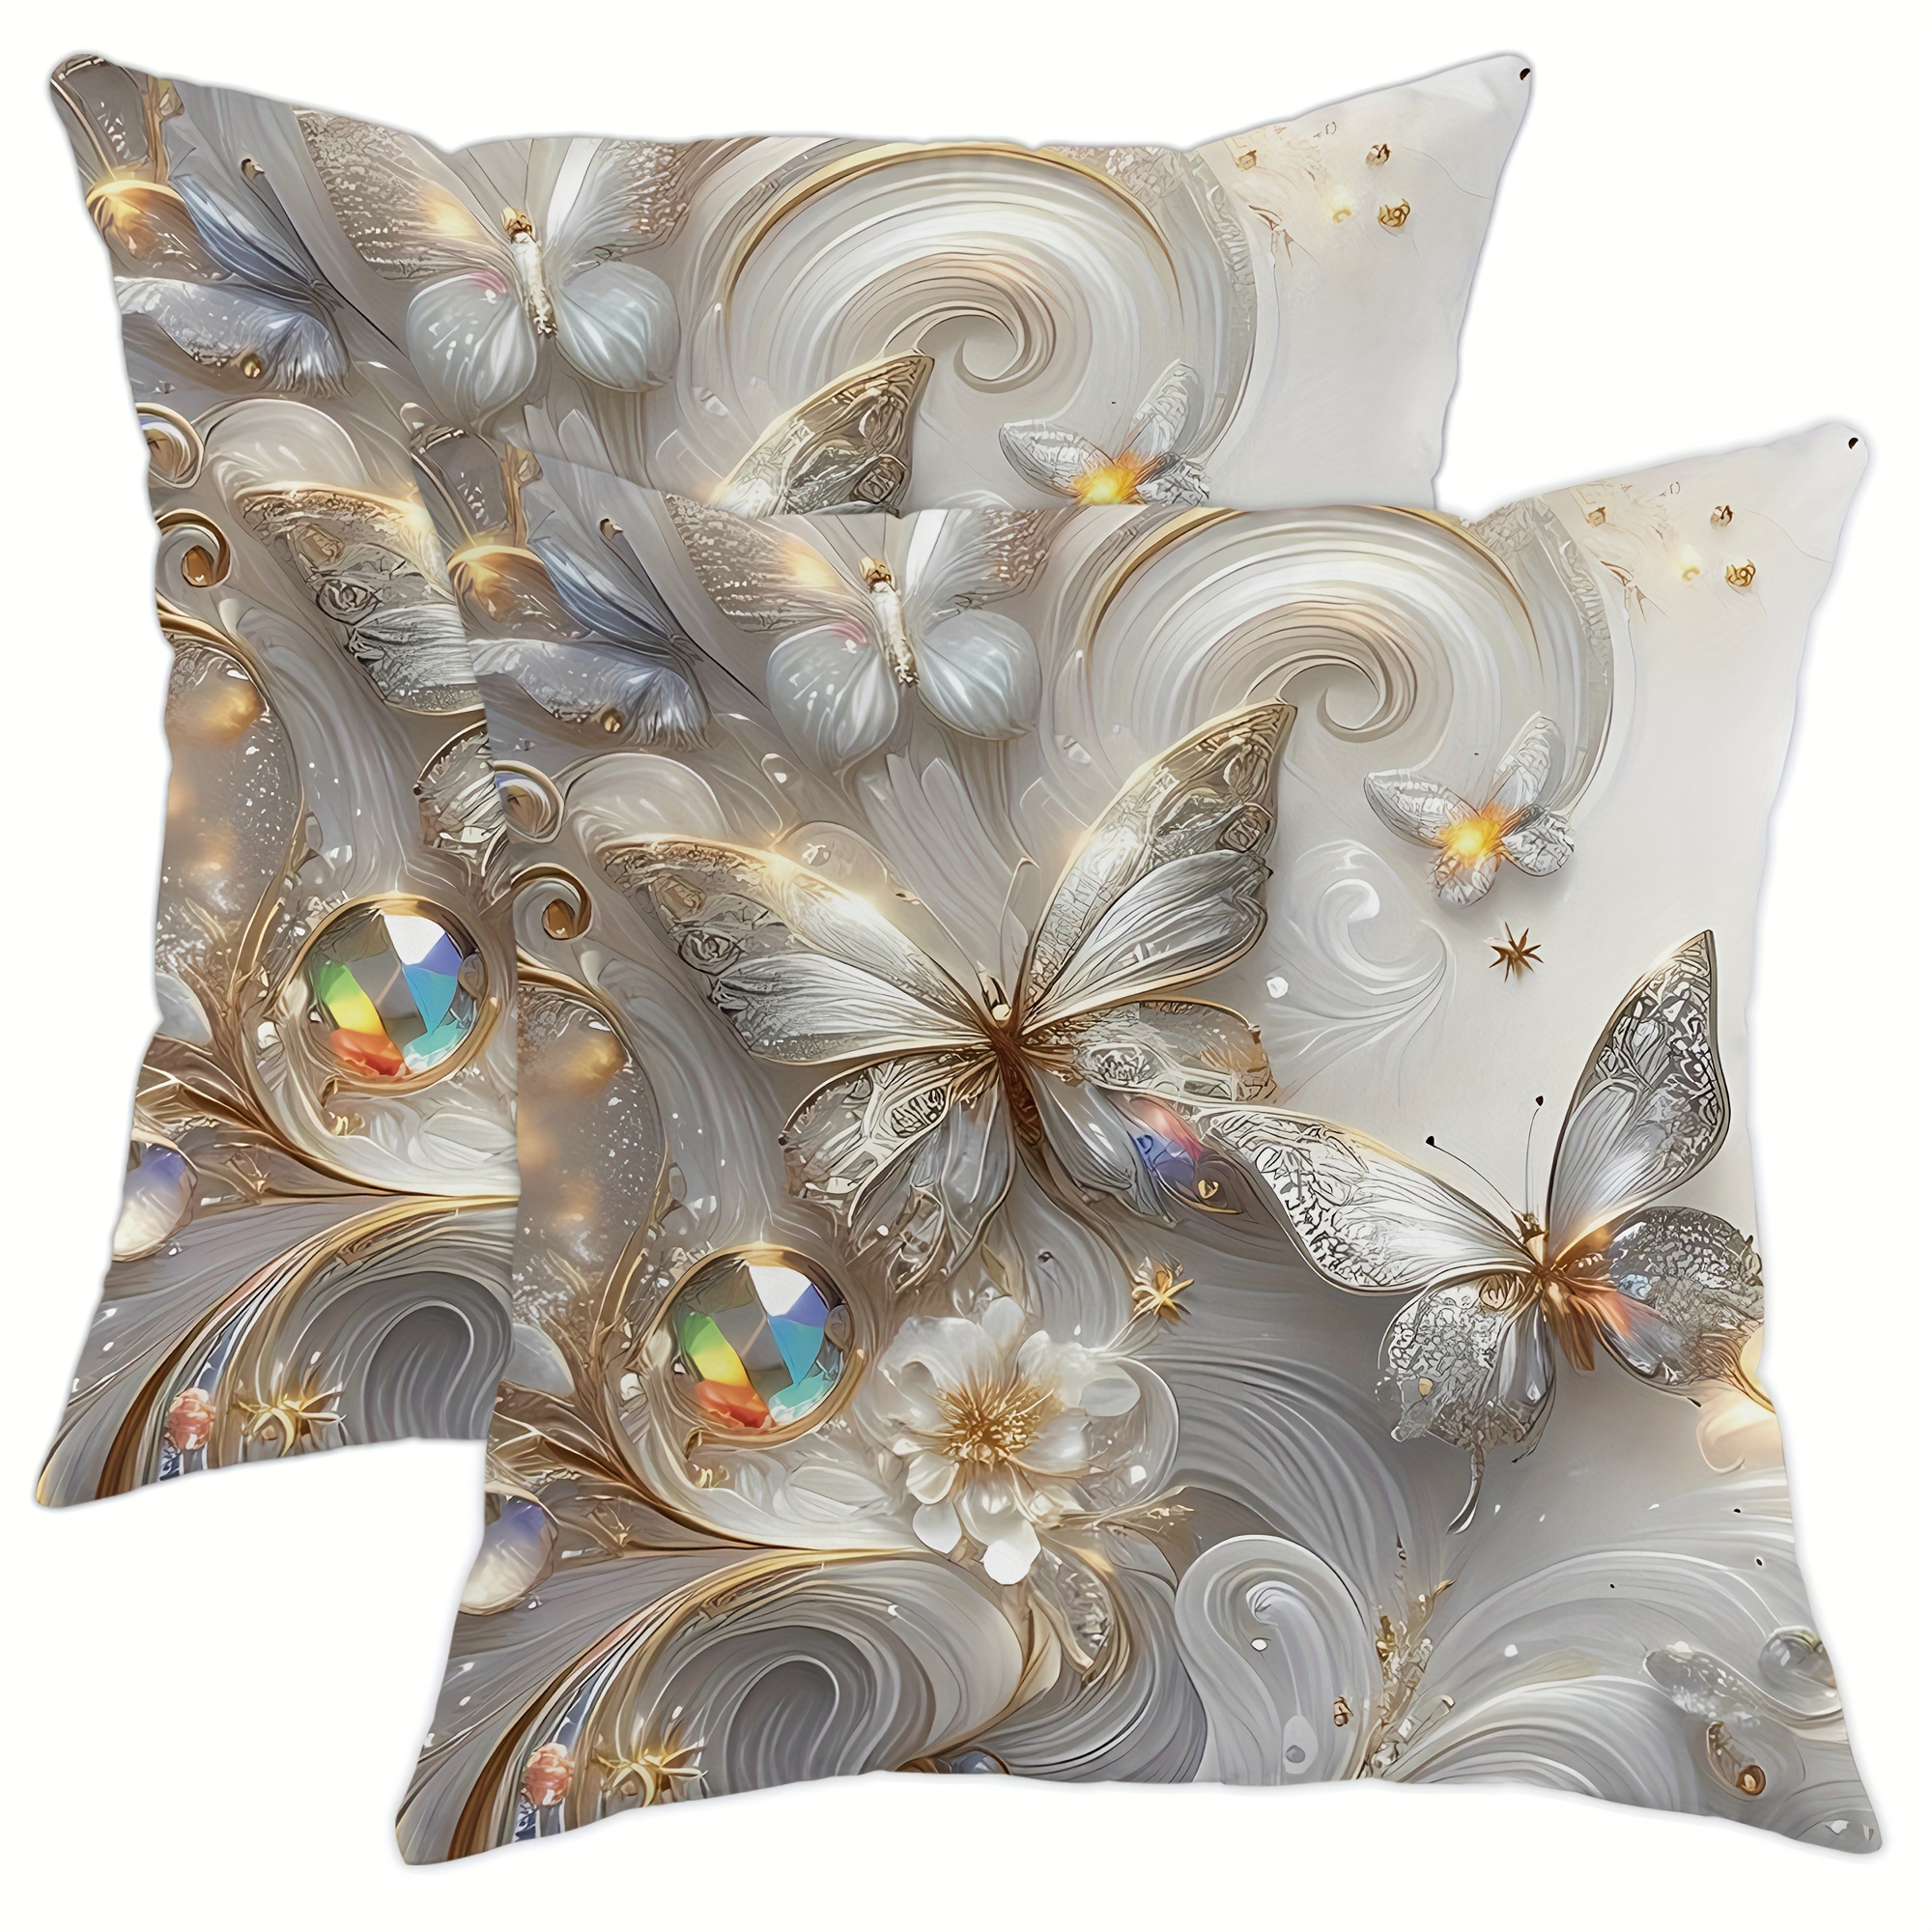 

2-piece Velvet Throw Pillow Covers 18x18in - Contemporary & Botanical Patterns With Lustrous Accents, Zip Closure, Machine Washable For Living Room And Bedroom Decor